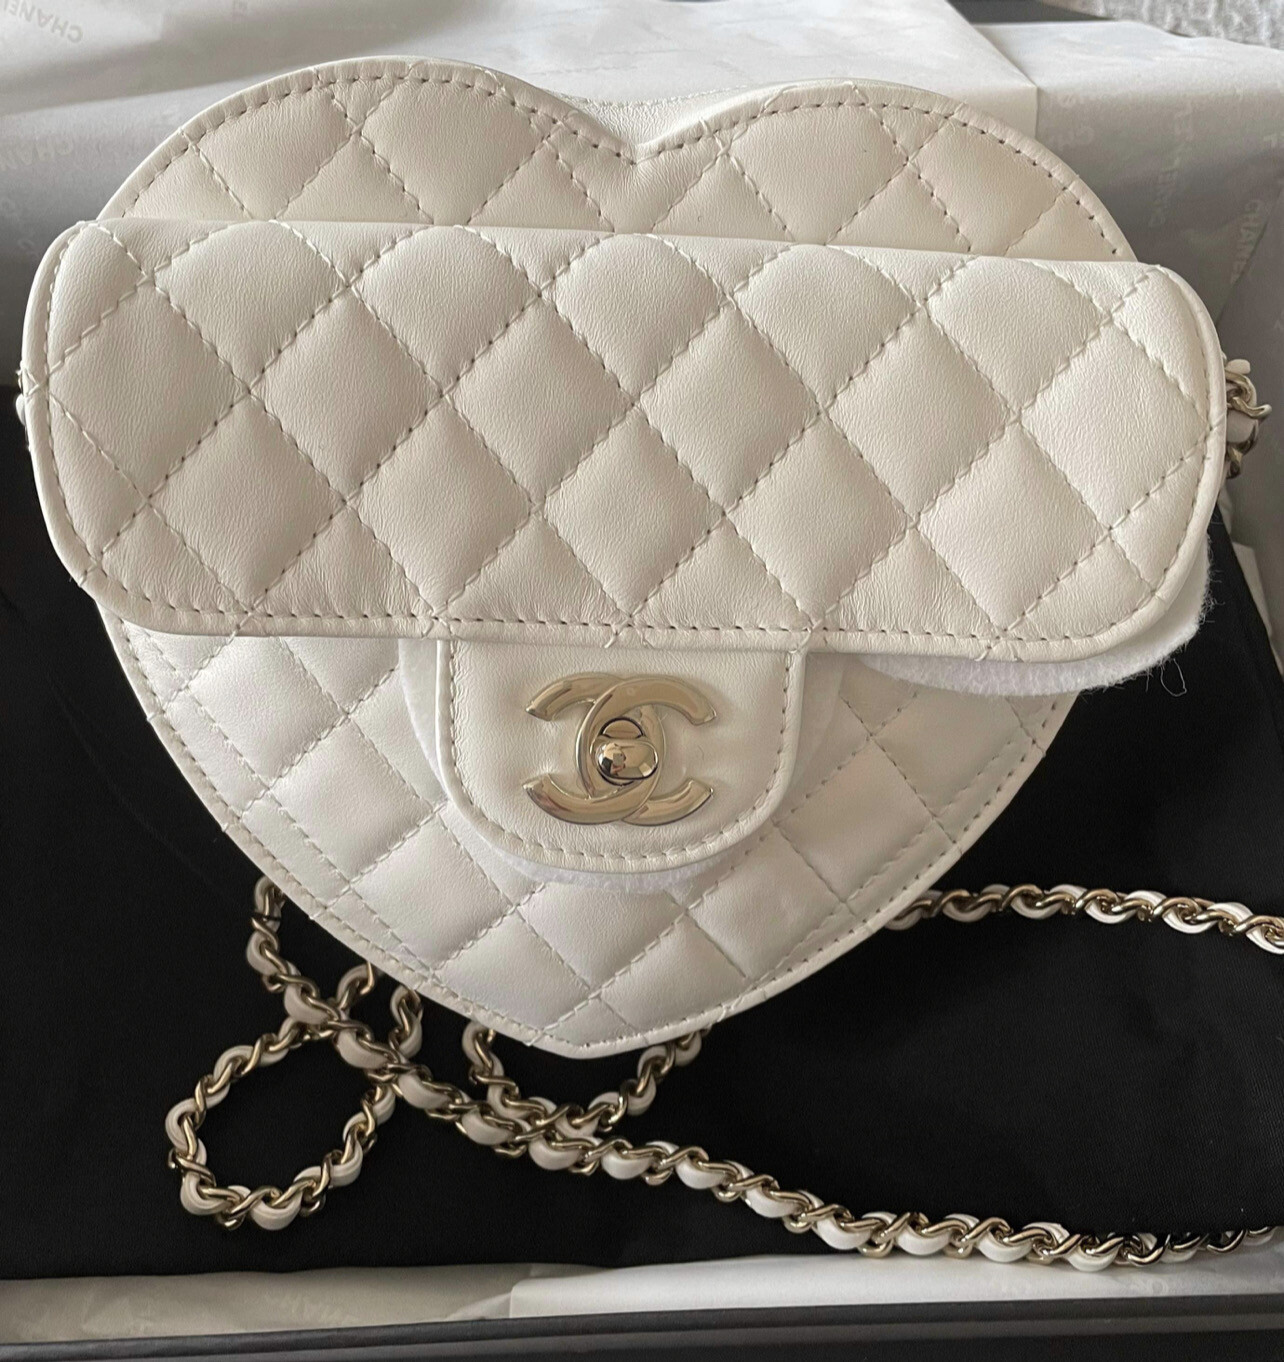 Chanel Heart Bag, Large, White Lambskin Leather, Gold Hardware, New in Box  GA001